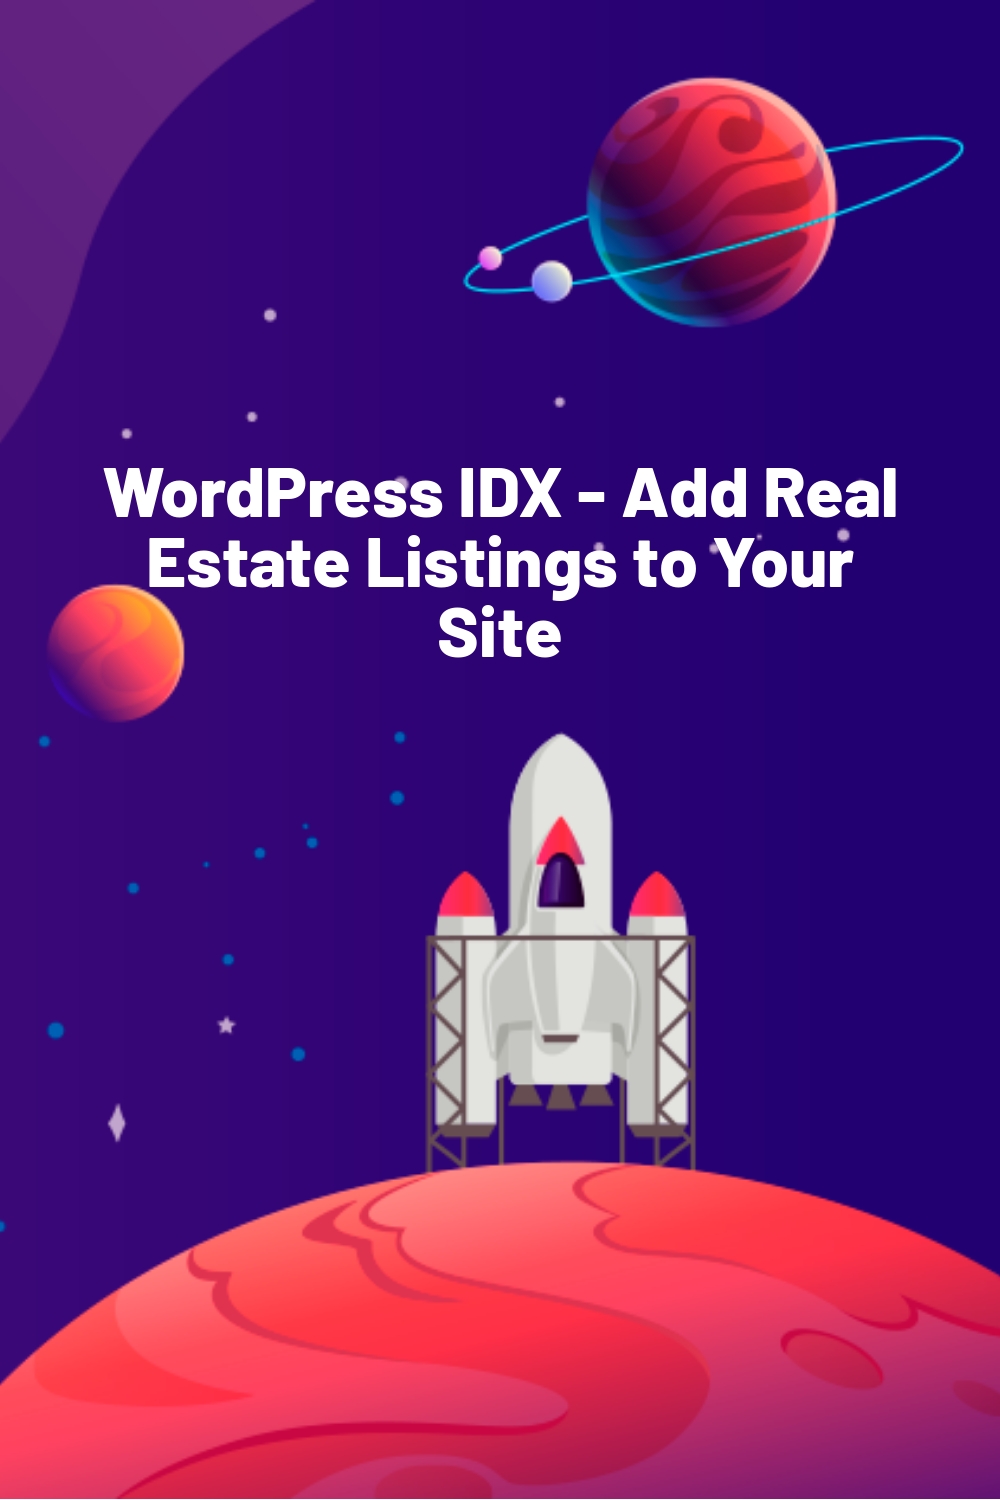 WordPress IDX – Add Real Estate Listings to Your Site